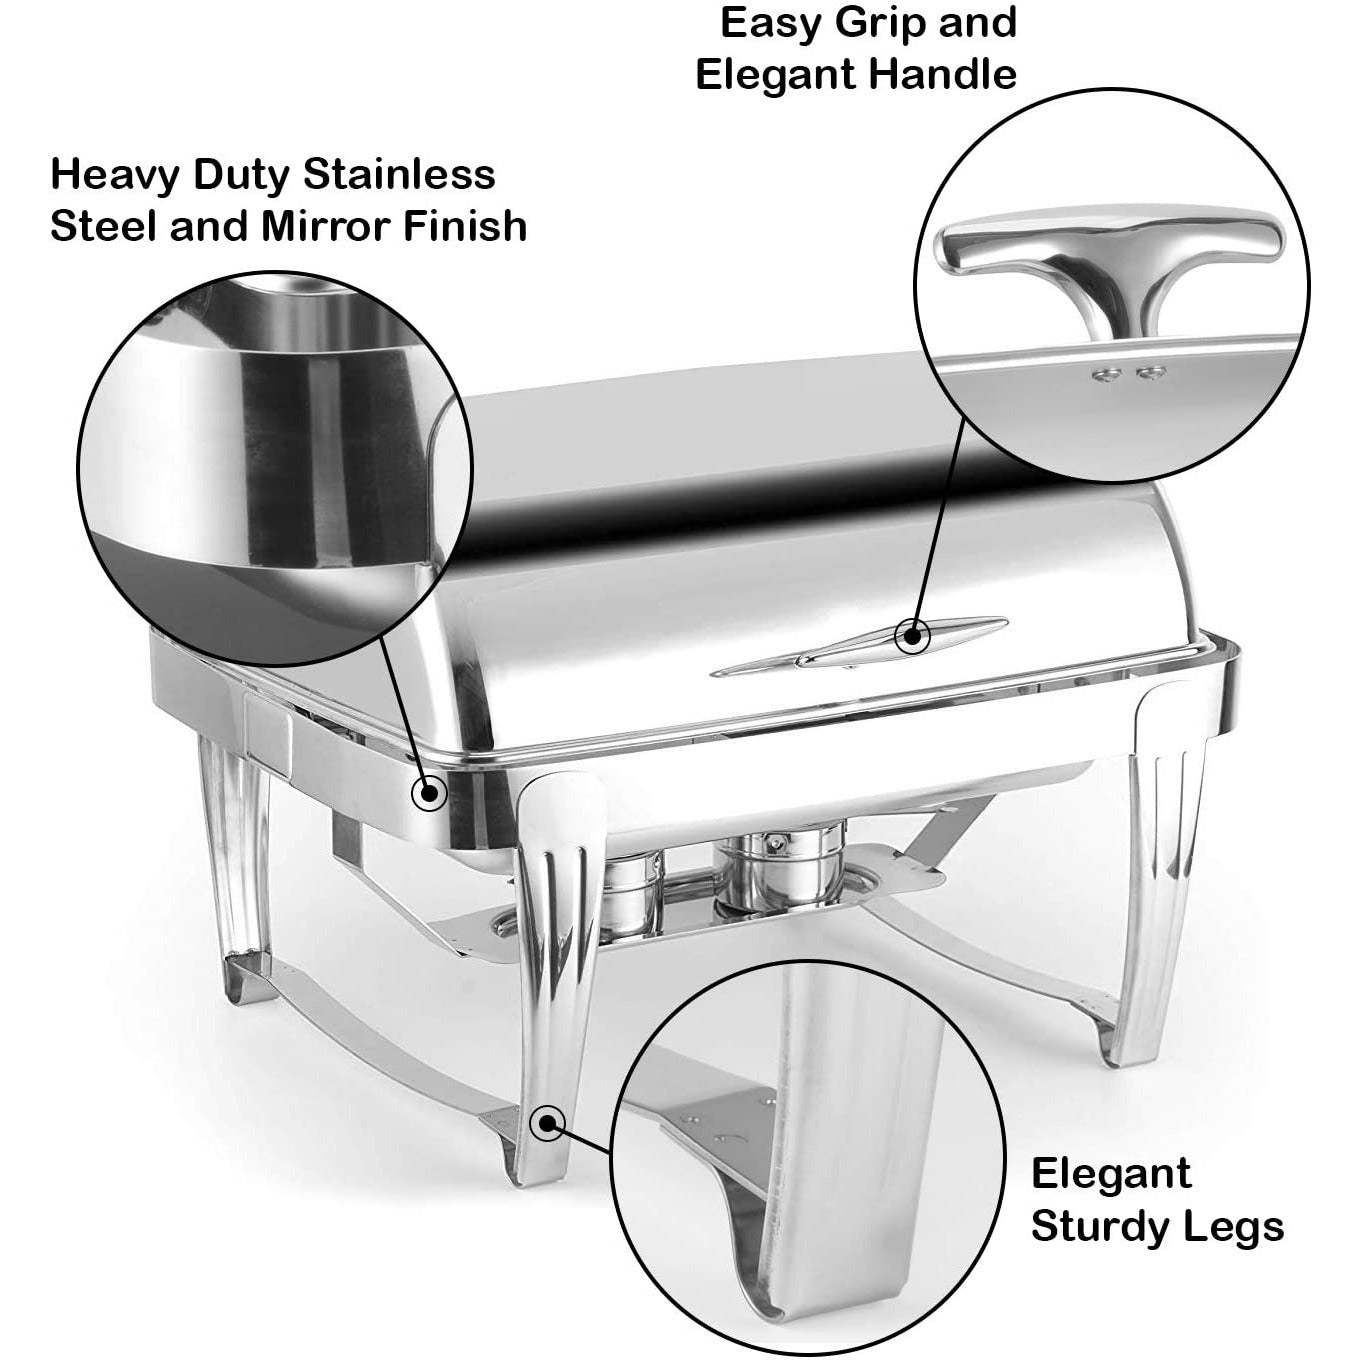 Deluxe High End Stainless Steel Chafer with Roll Top, 8 Quart